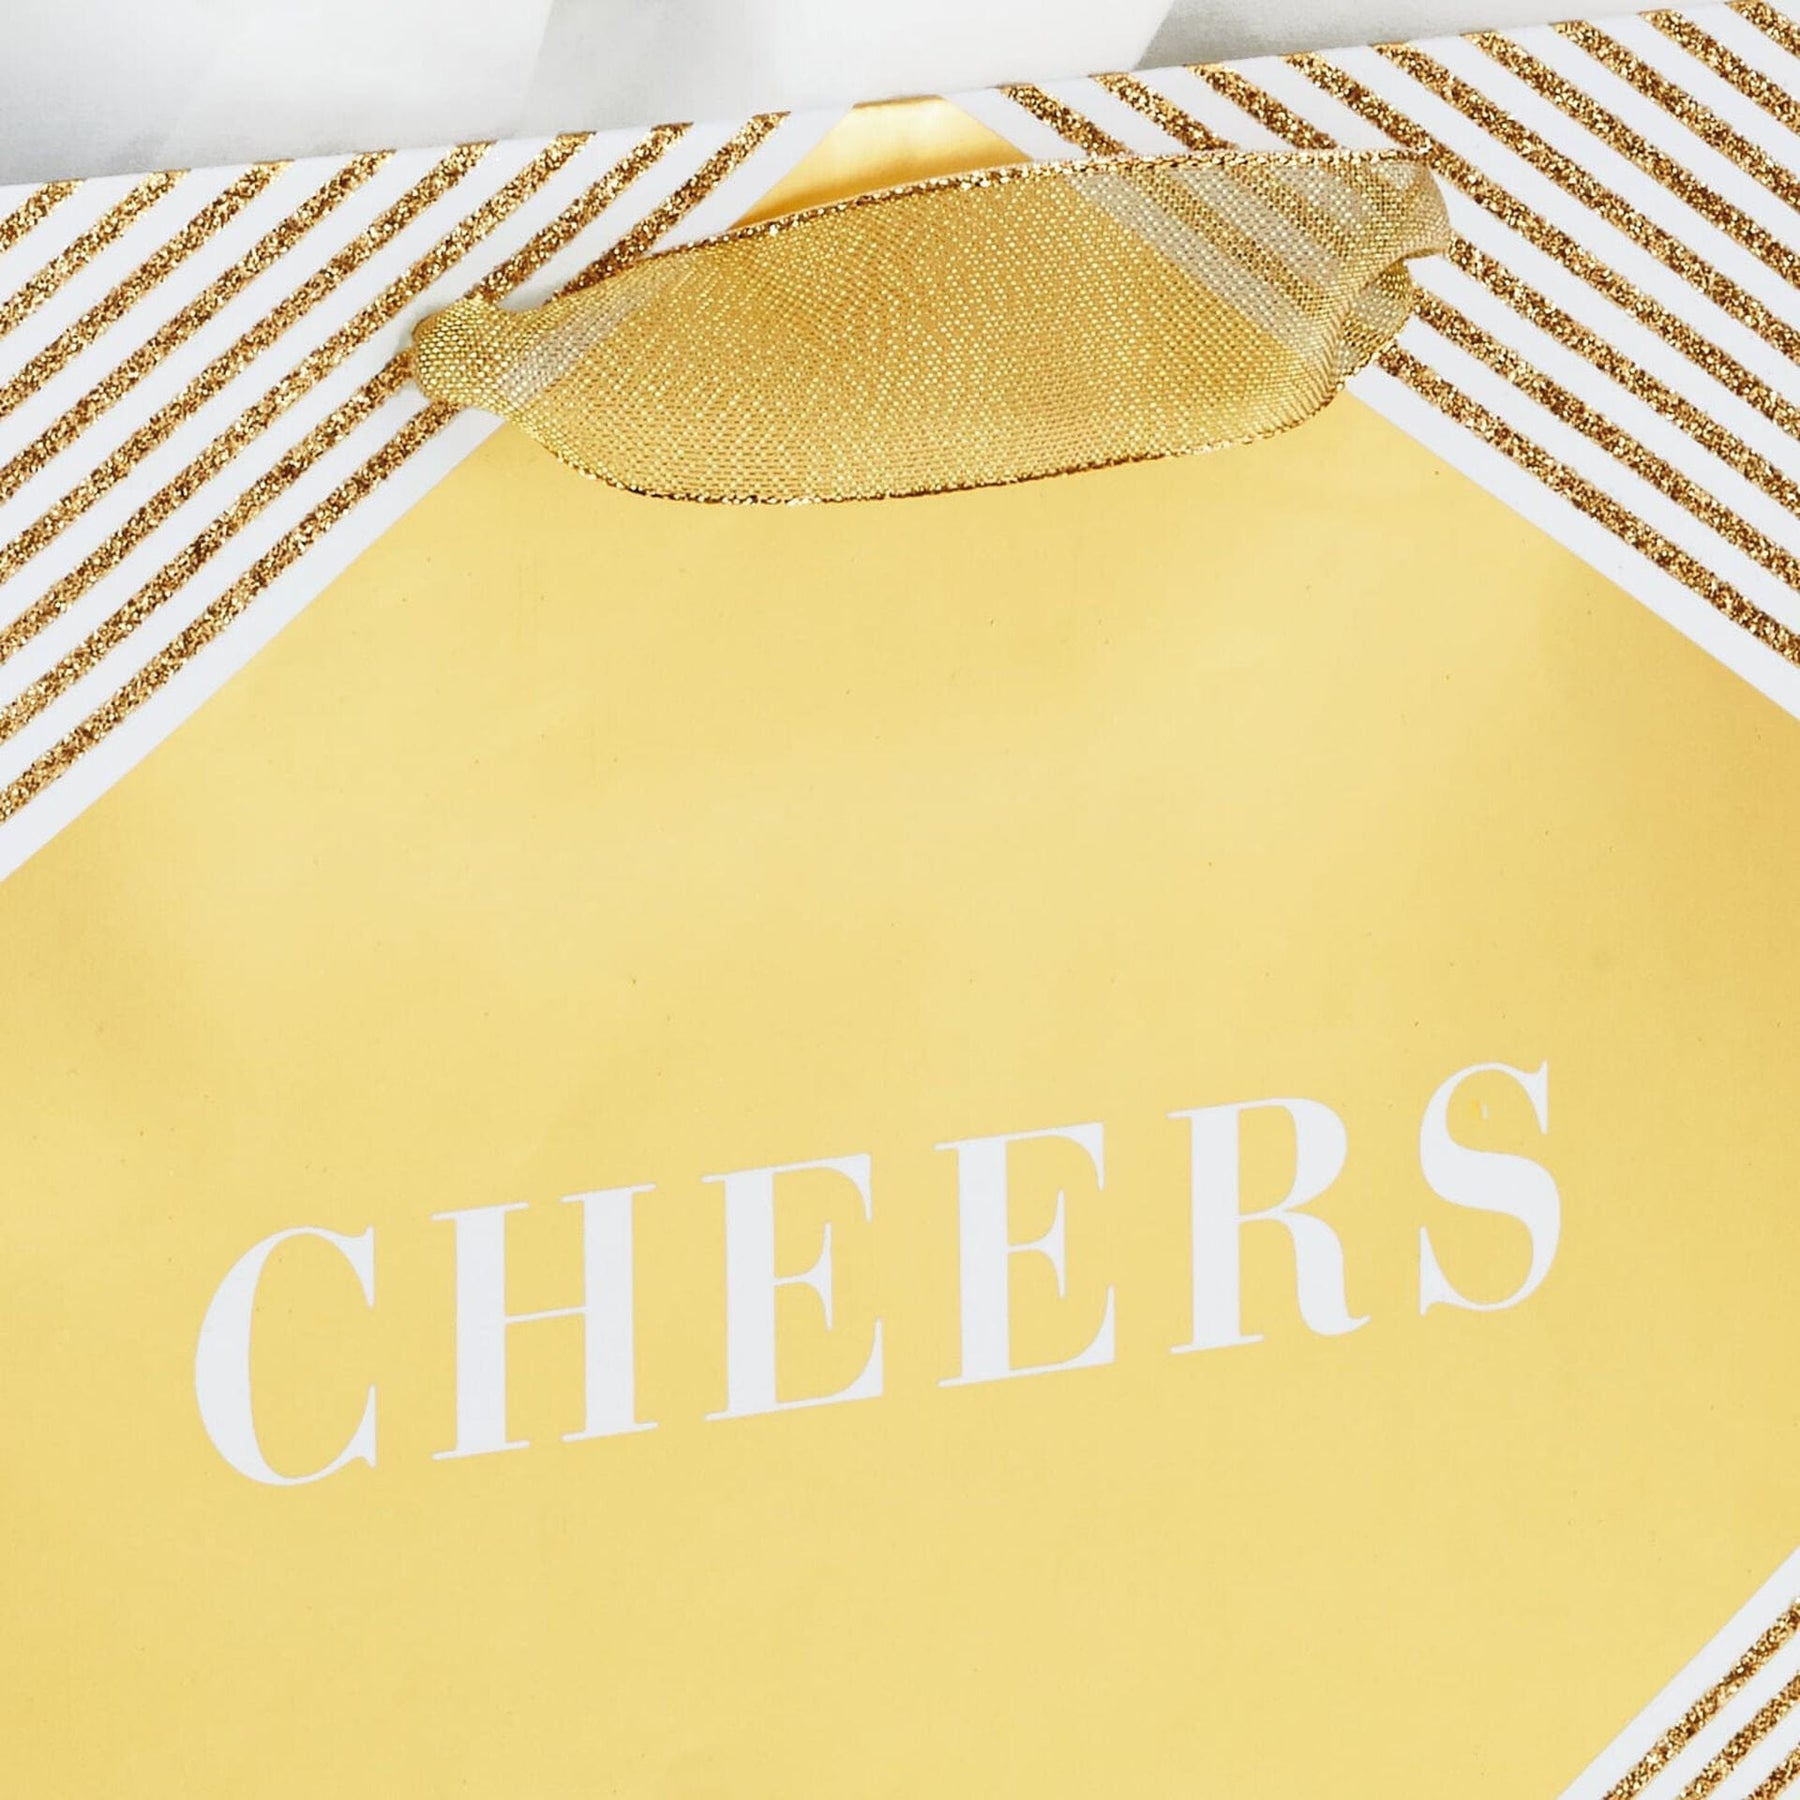 Hallmark 7.7 Horizontal Cheers on Gold Gift Bag with Tissue